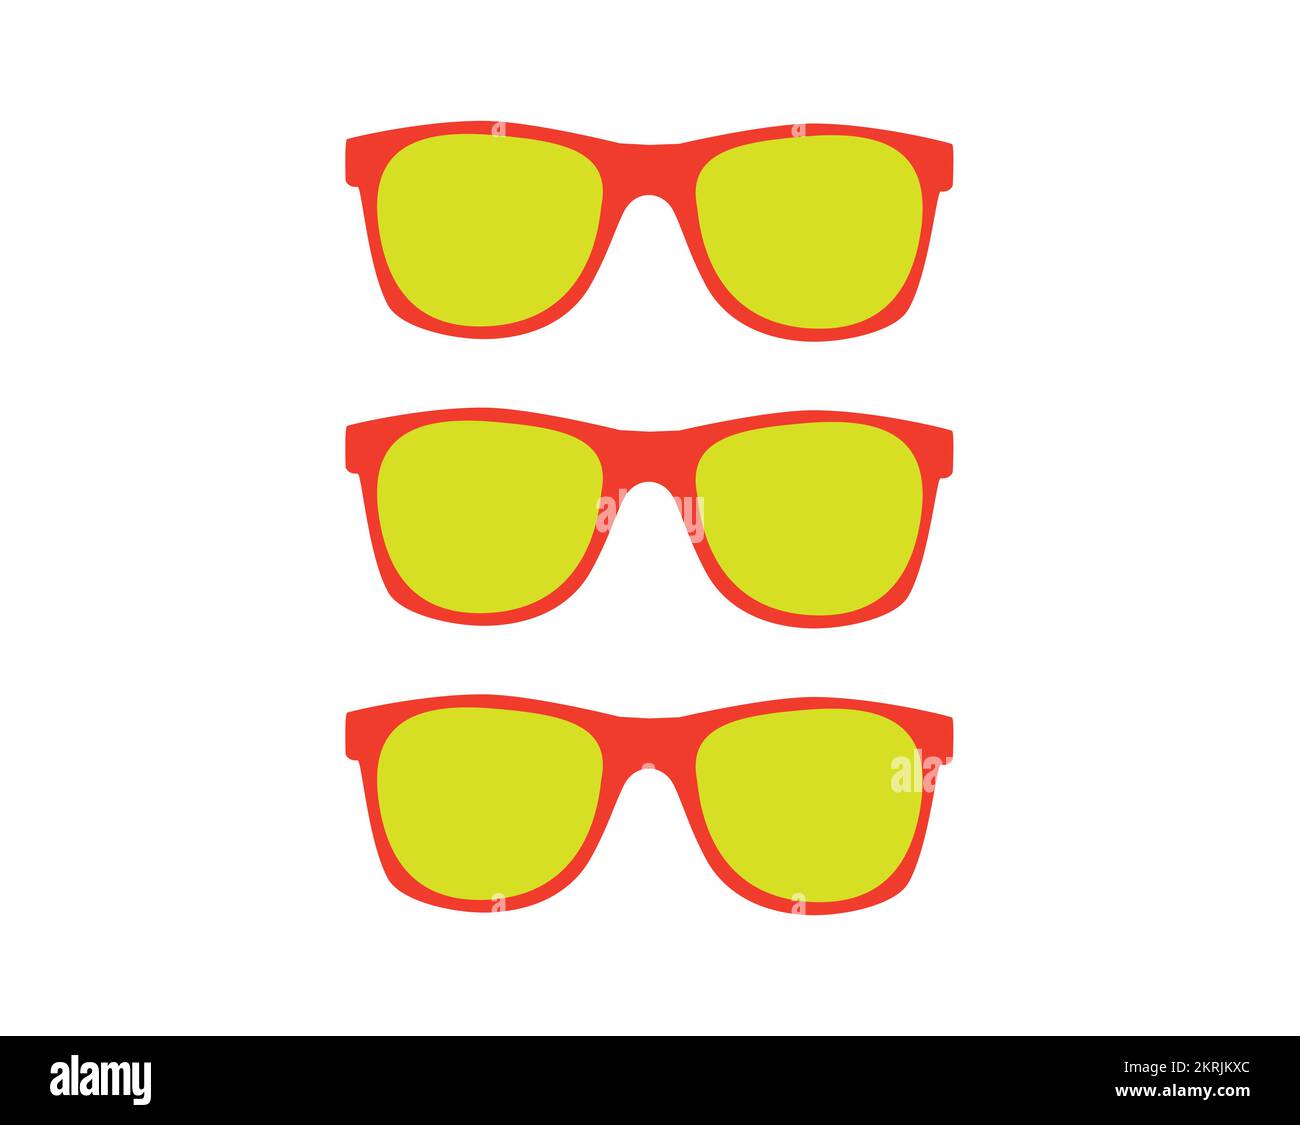 vectors - Sun and glasses images vector stock photography 30 Page hi-res - Alamy